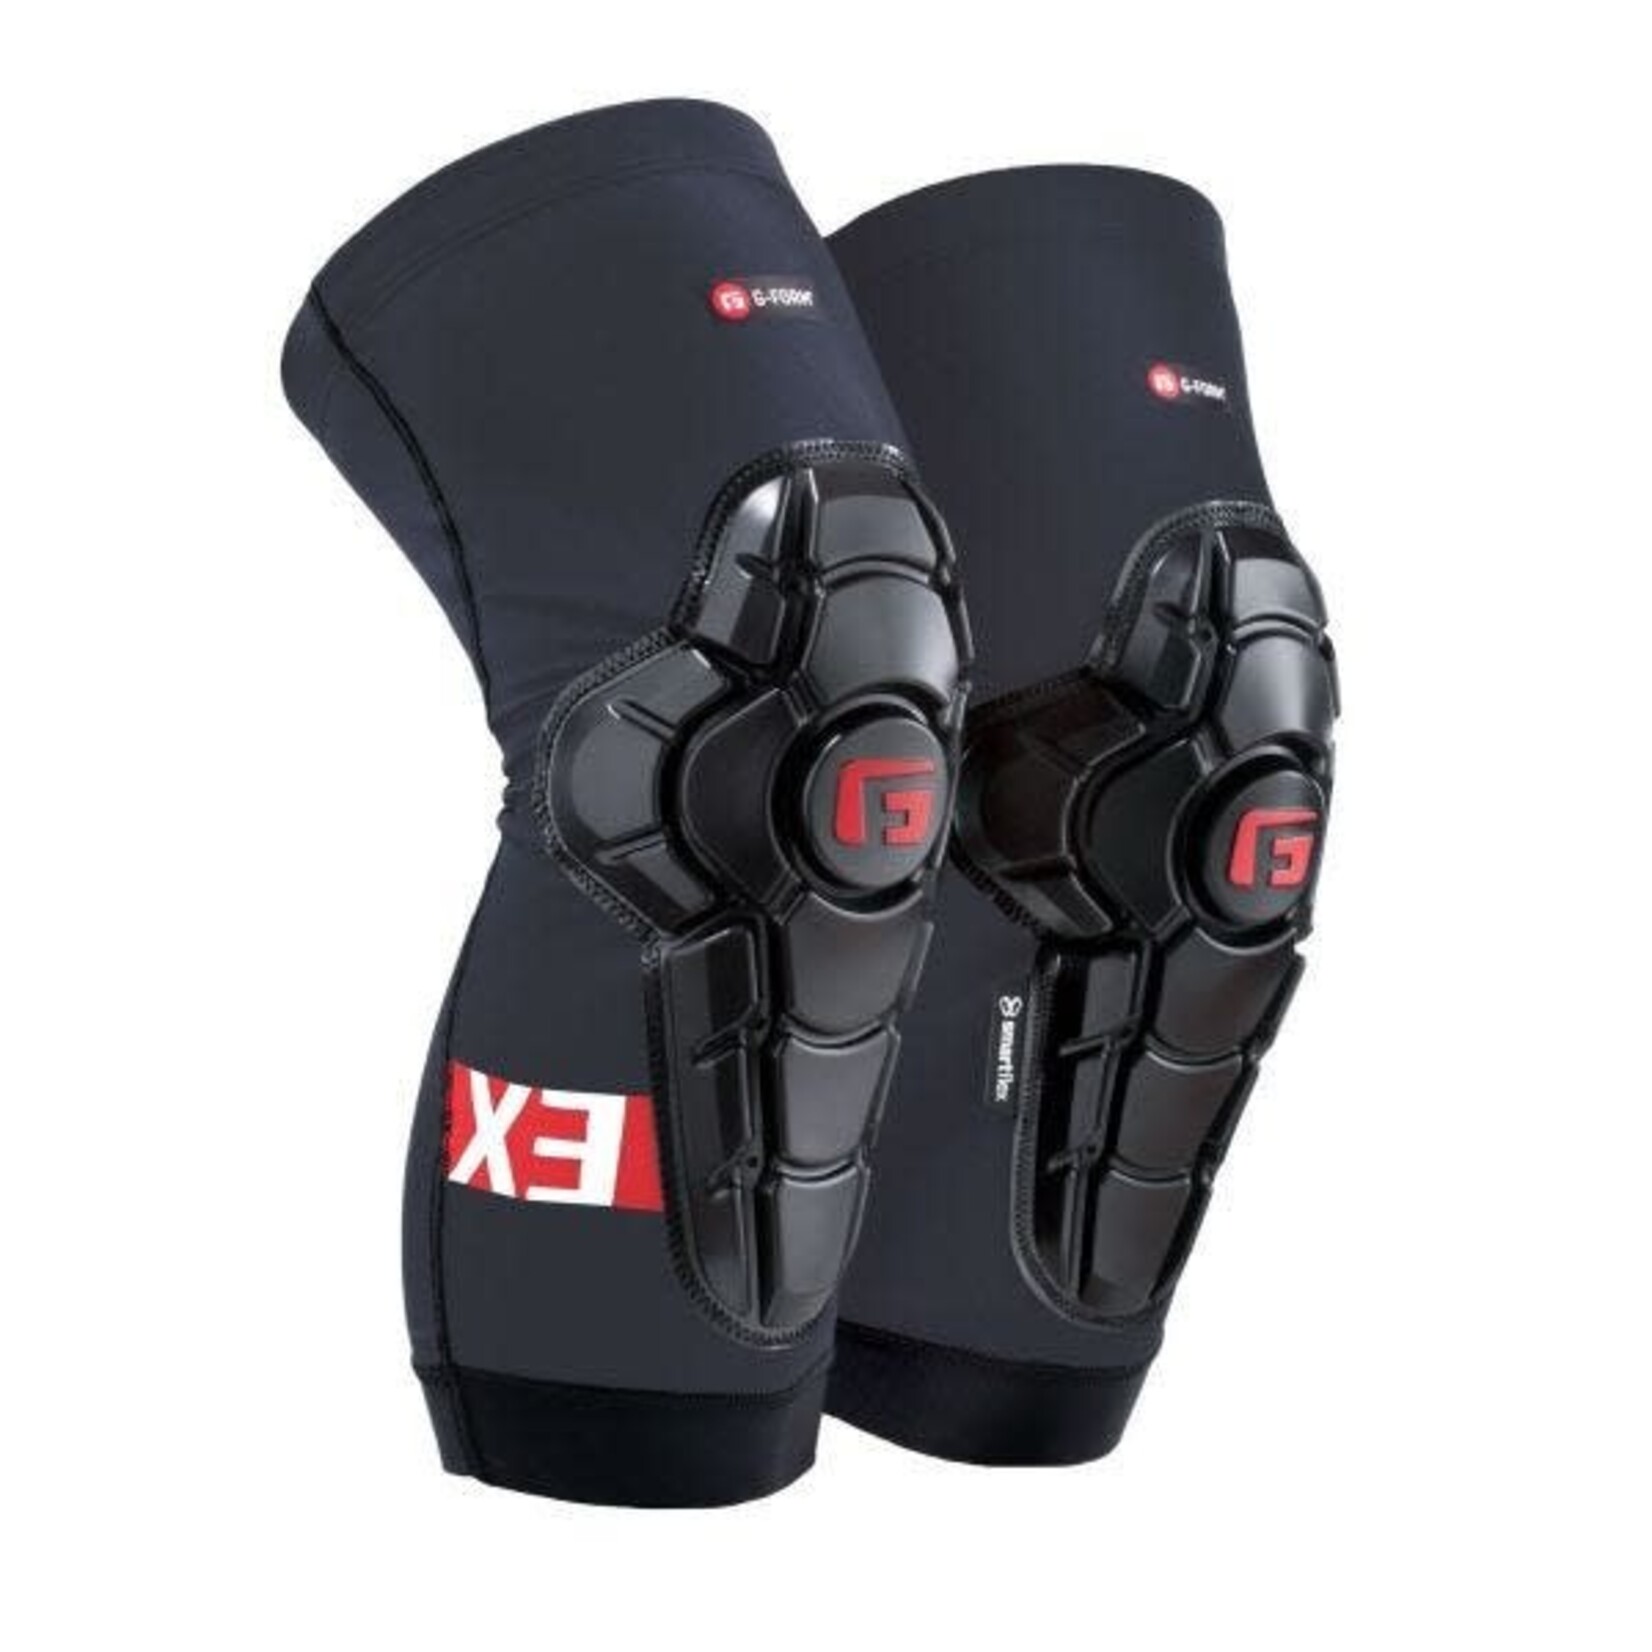 G-Form G-Form Youth Pro- X3 Knee